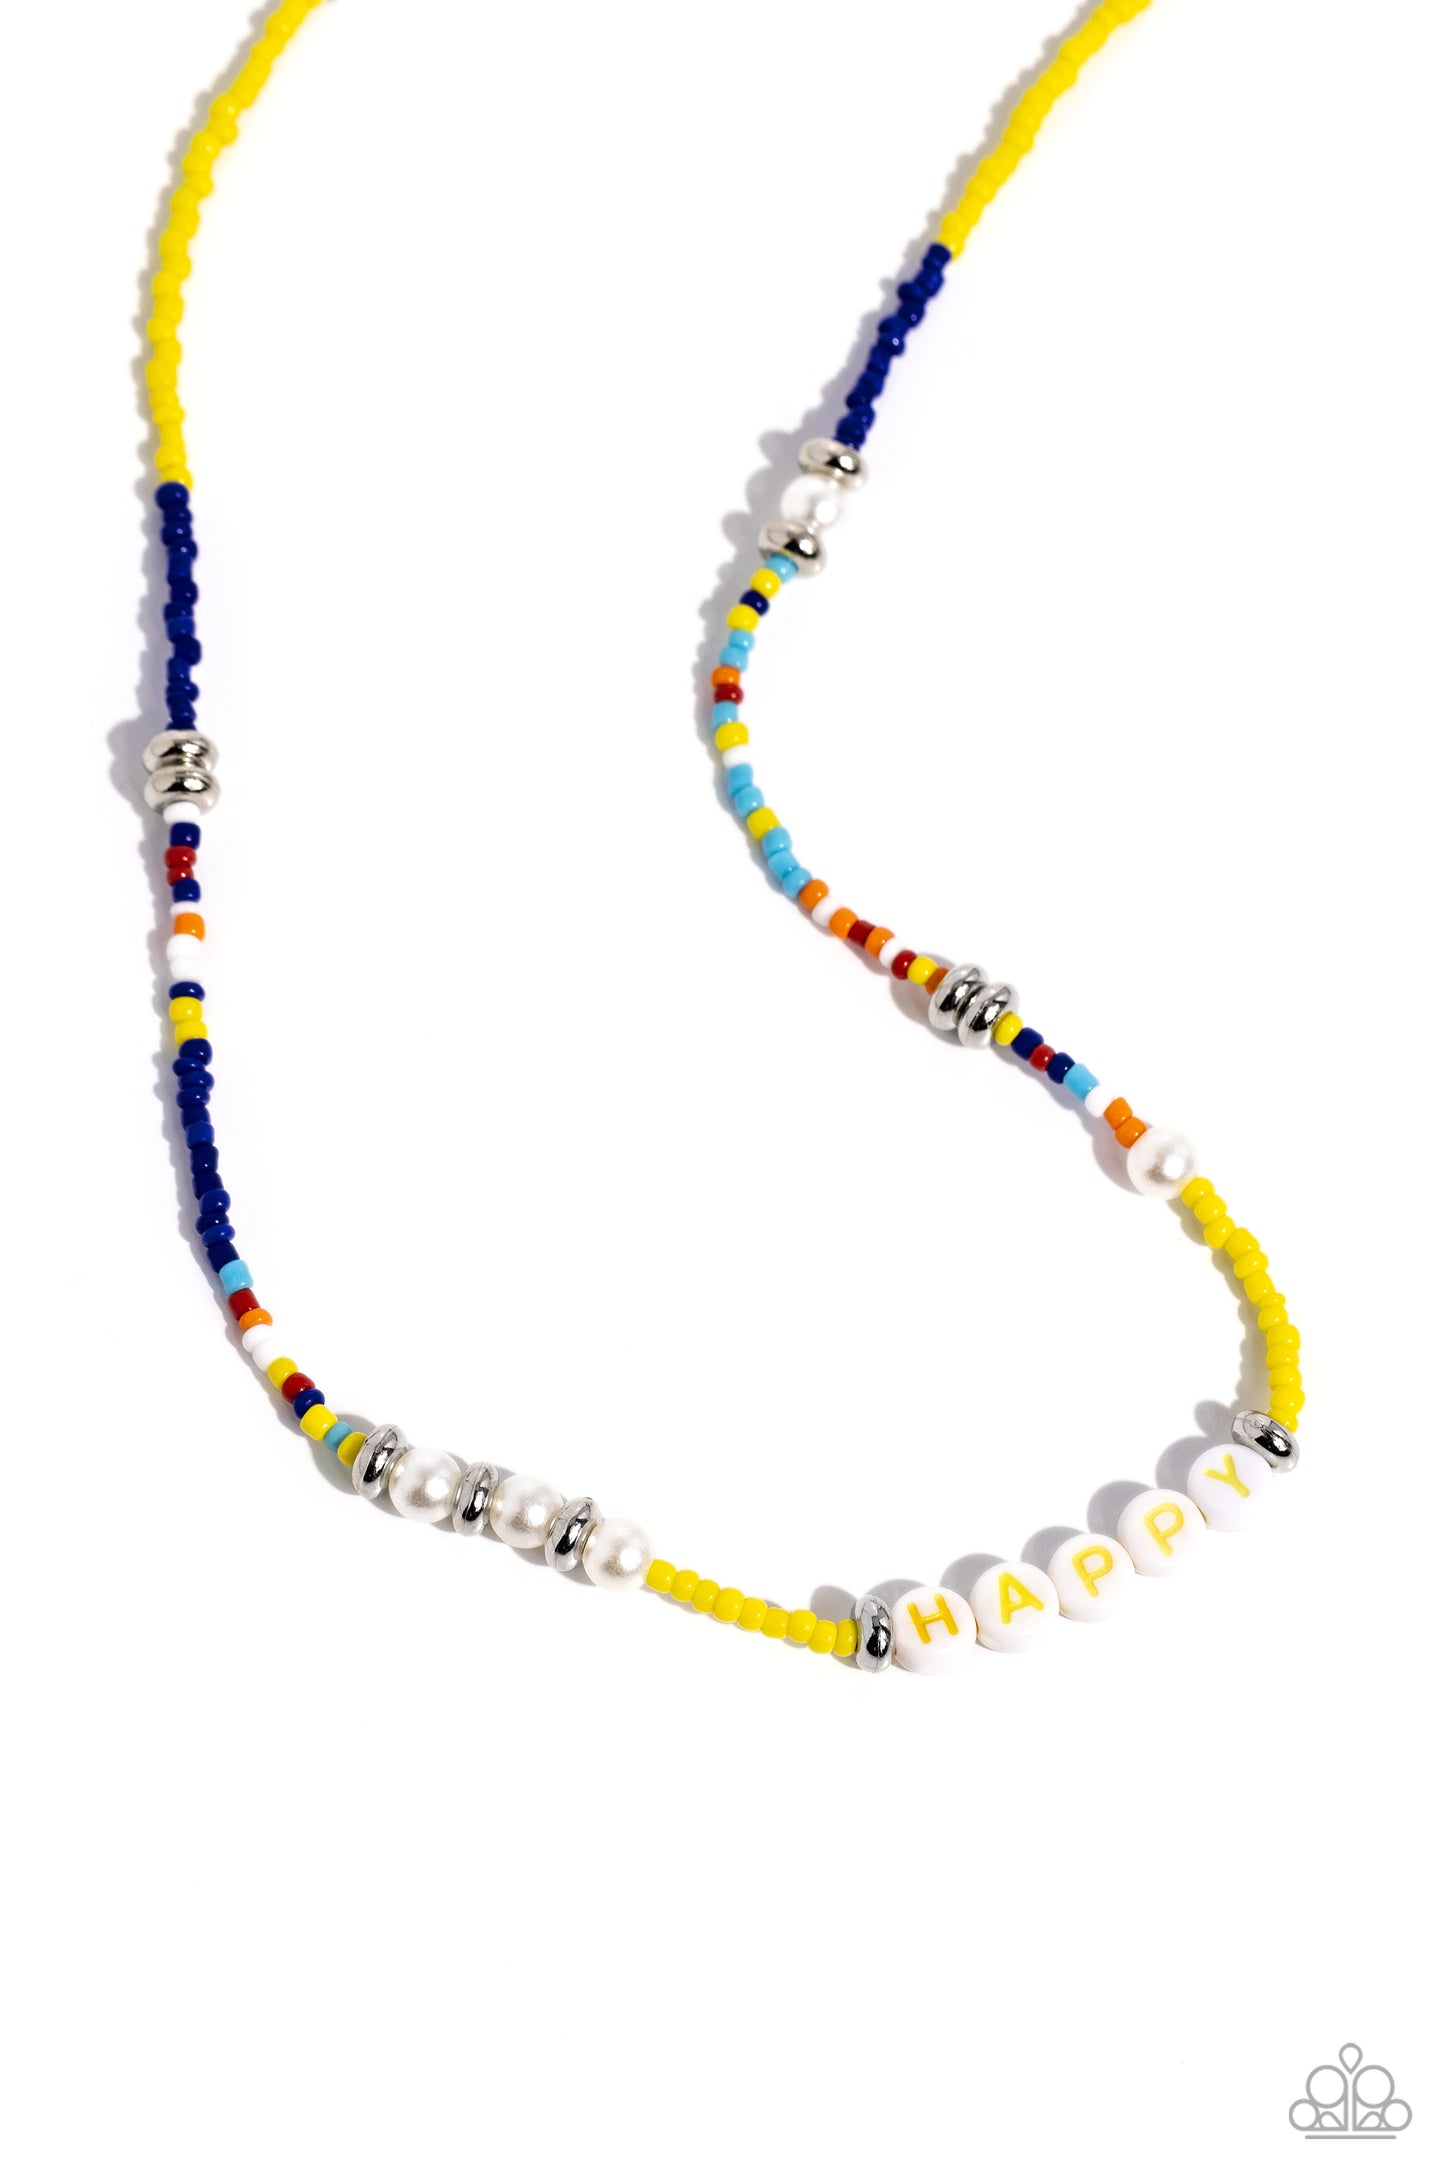 Happy to See You Yellow Necklace - Paparazzi Accessories  Infused along an invisible string, white pearls, multicolored seed beads, silver accents, and white beads spelling out the word "HAPPY" in yellow lettering wrap around the neckline for an optimistic, youthful display. Features an adjustable clasp closure.  Sold as one individual necklace. Includes one pair of matching earrings.  P2WD-YWXX-085XX